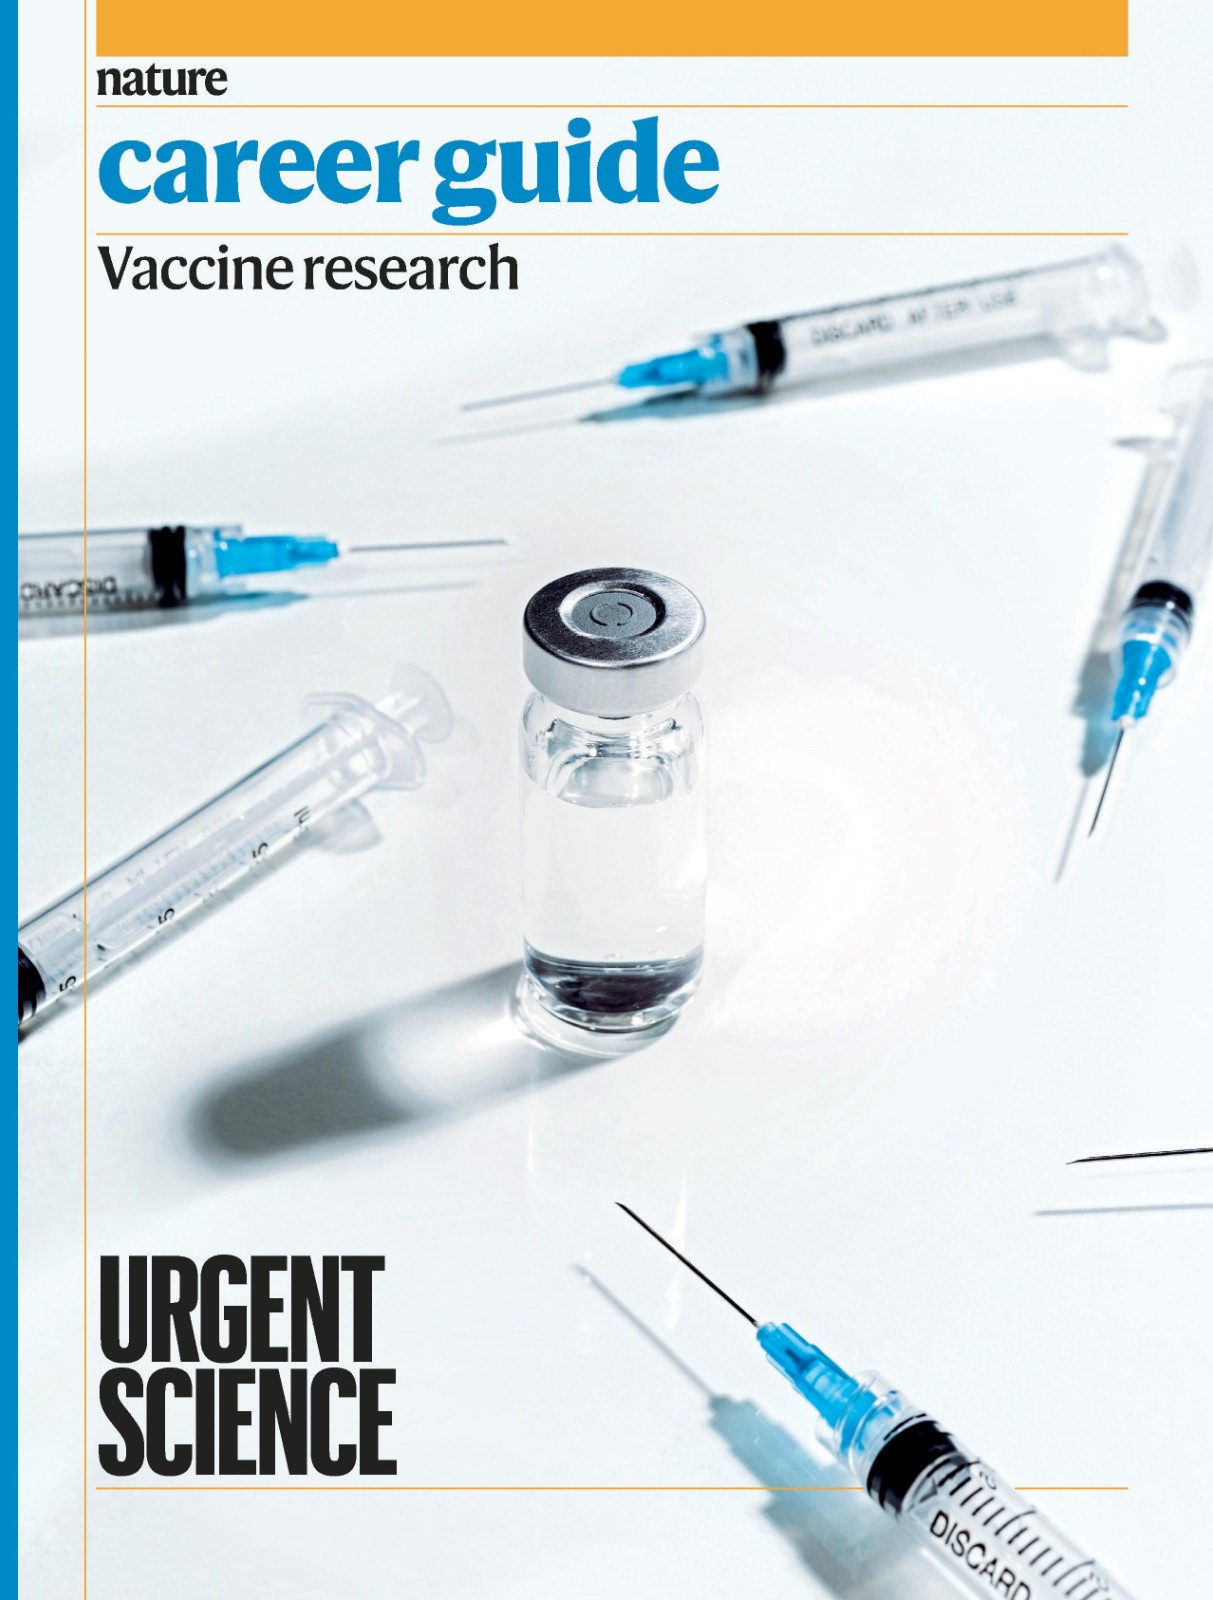 Career Guide on Vaccine research